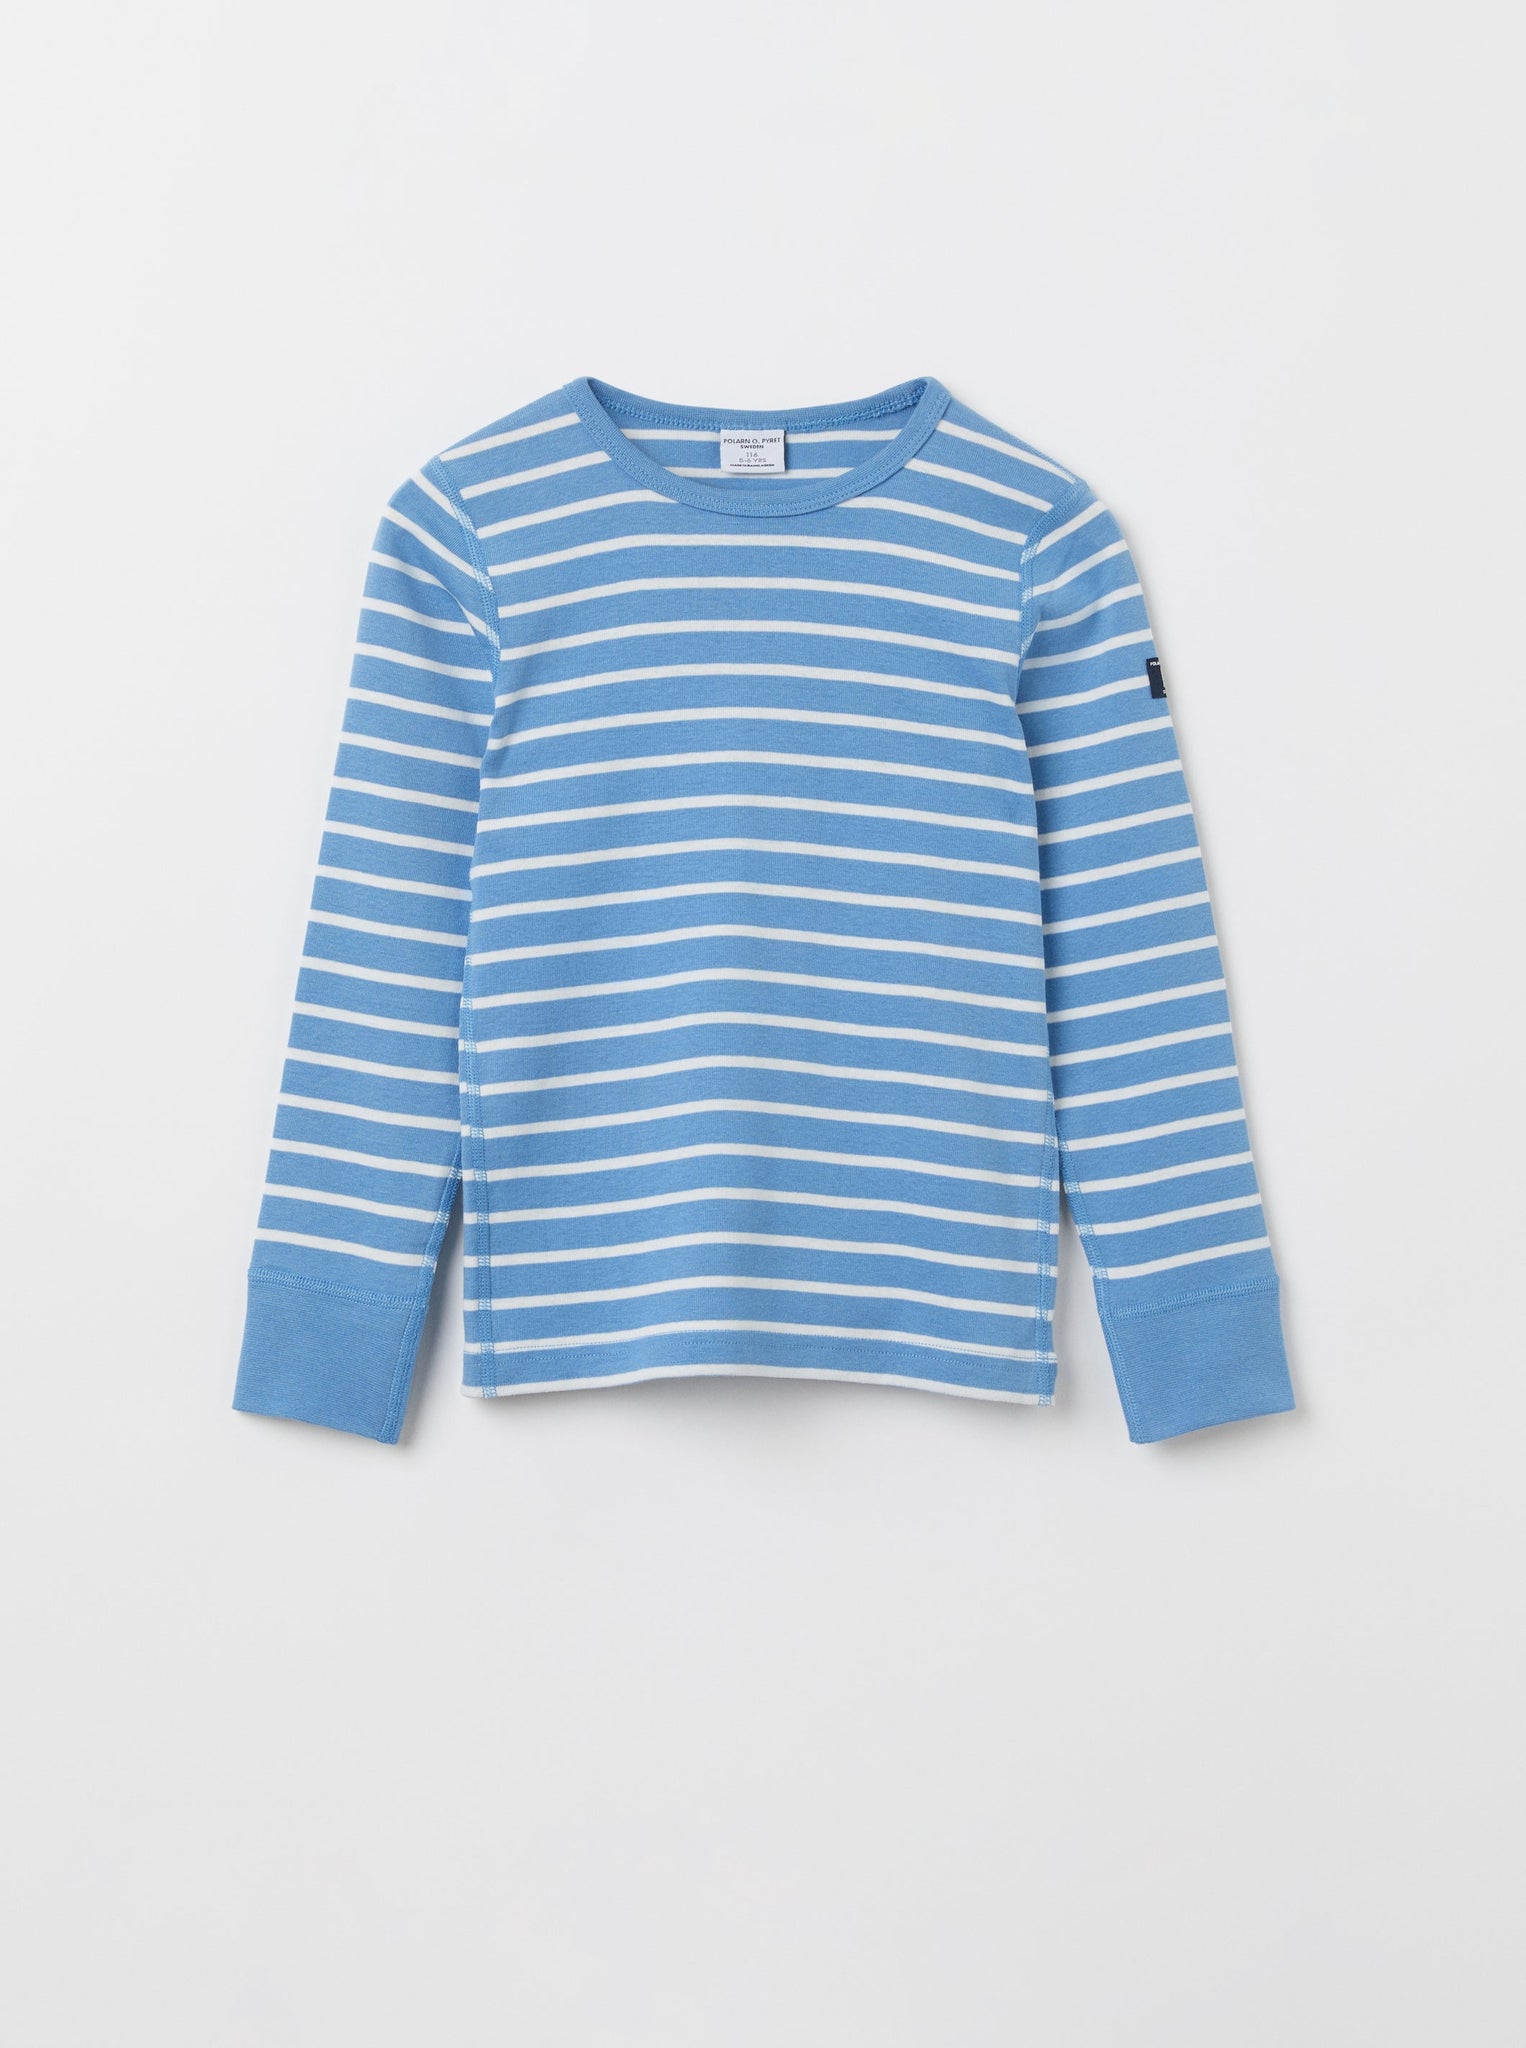 Striped Organic Cotton Blue Kids Top from the Polarn O. Pyret kidswear collection. Nordic kids clothes made from sustainable sources.